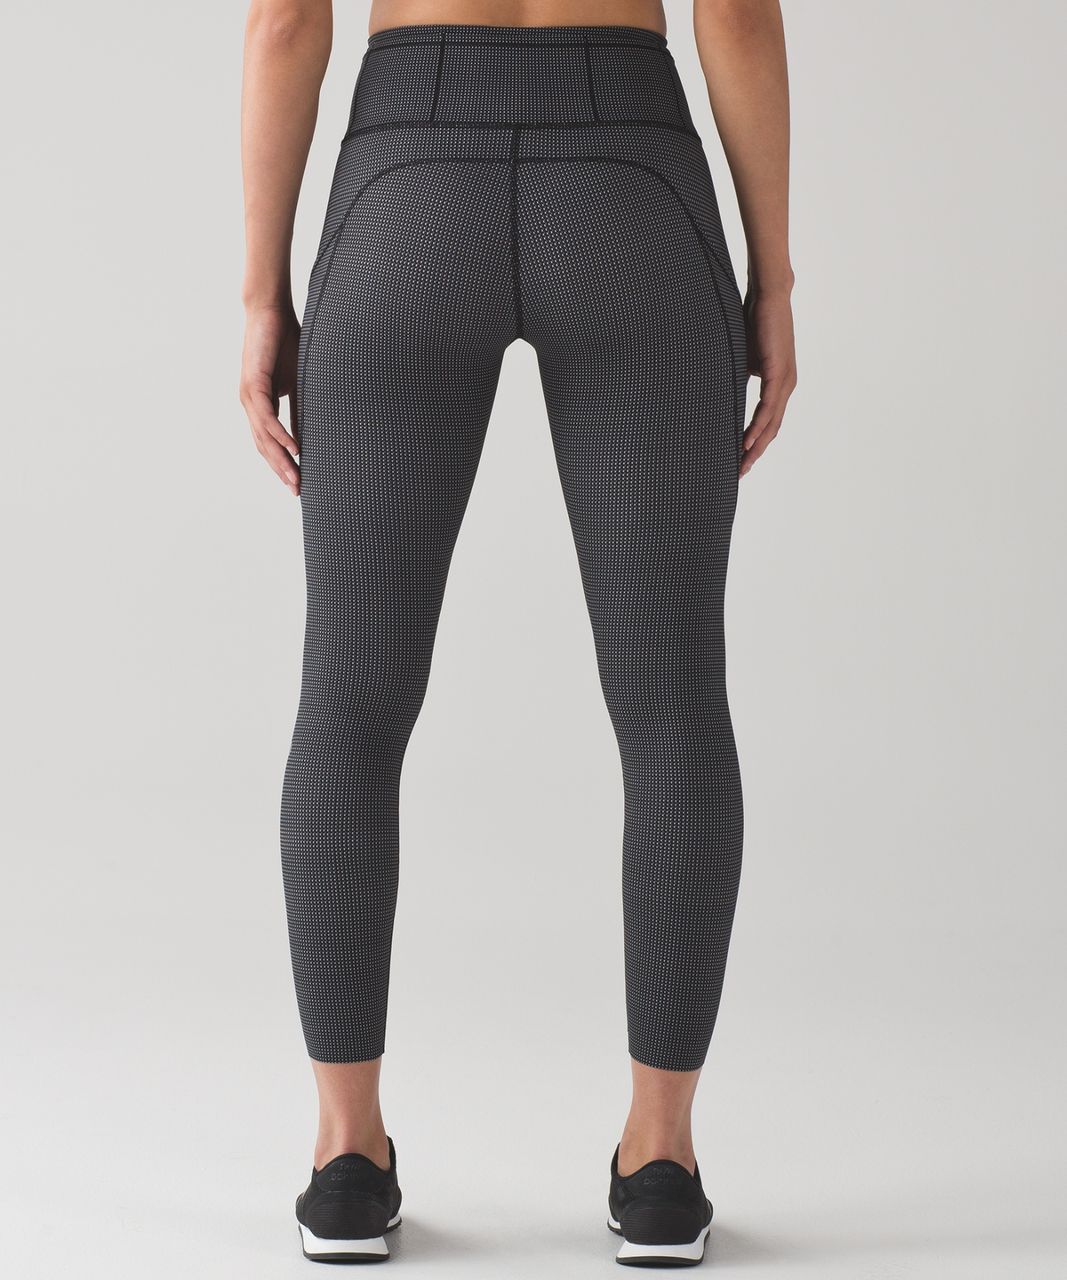 Lululemon Fast And Free 7/8 Tight - Teeny Check Print White Black